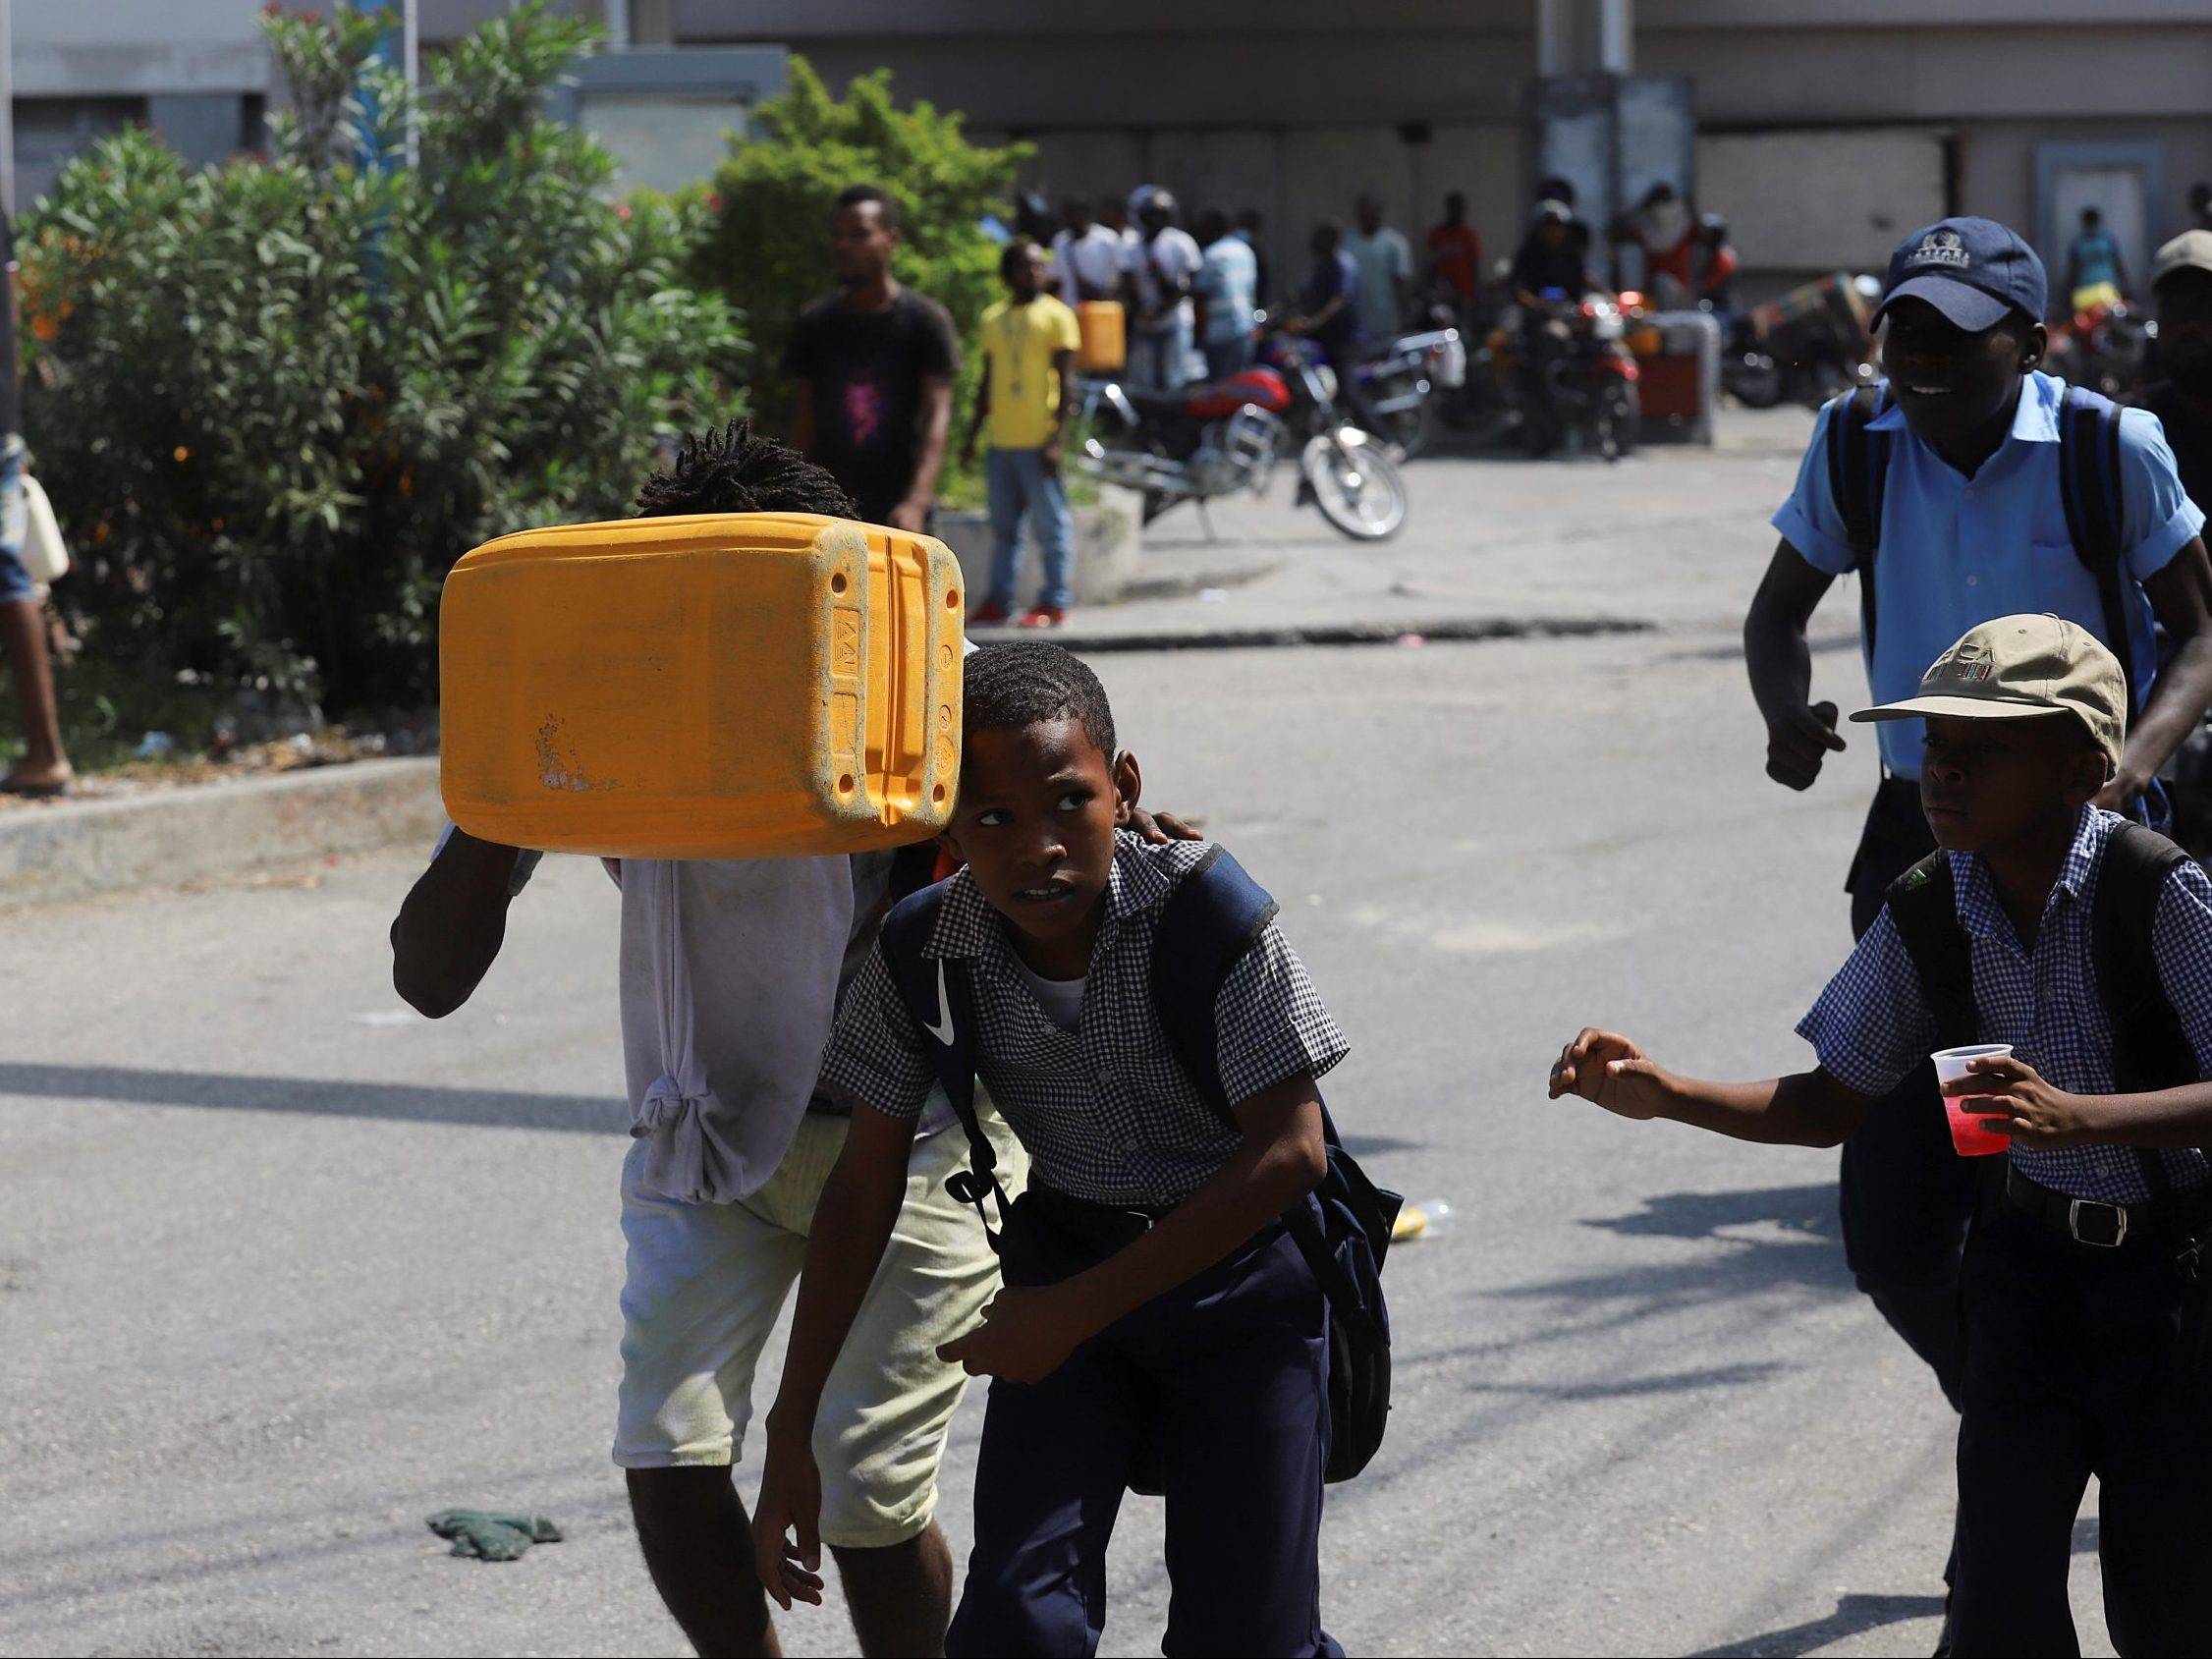 Canada Temporarily Withdraws Non-Essential Personnel From Embassy in Haiti